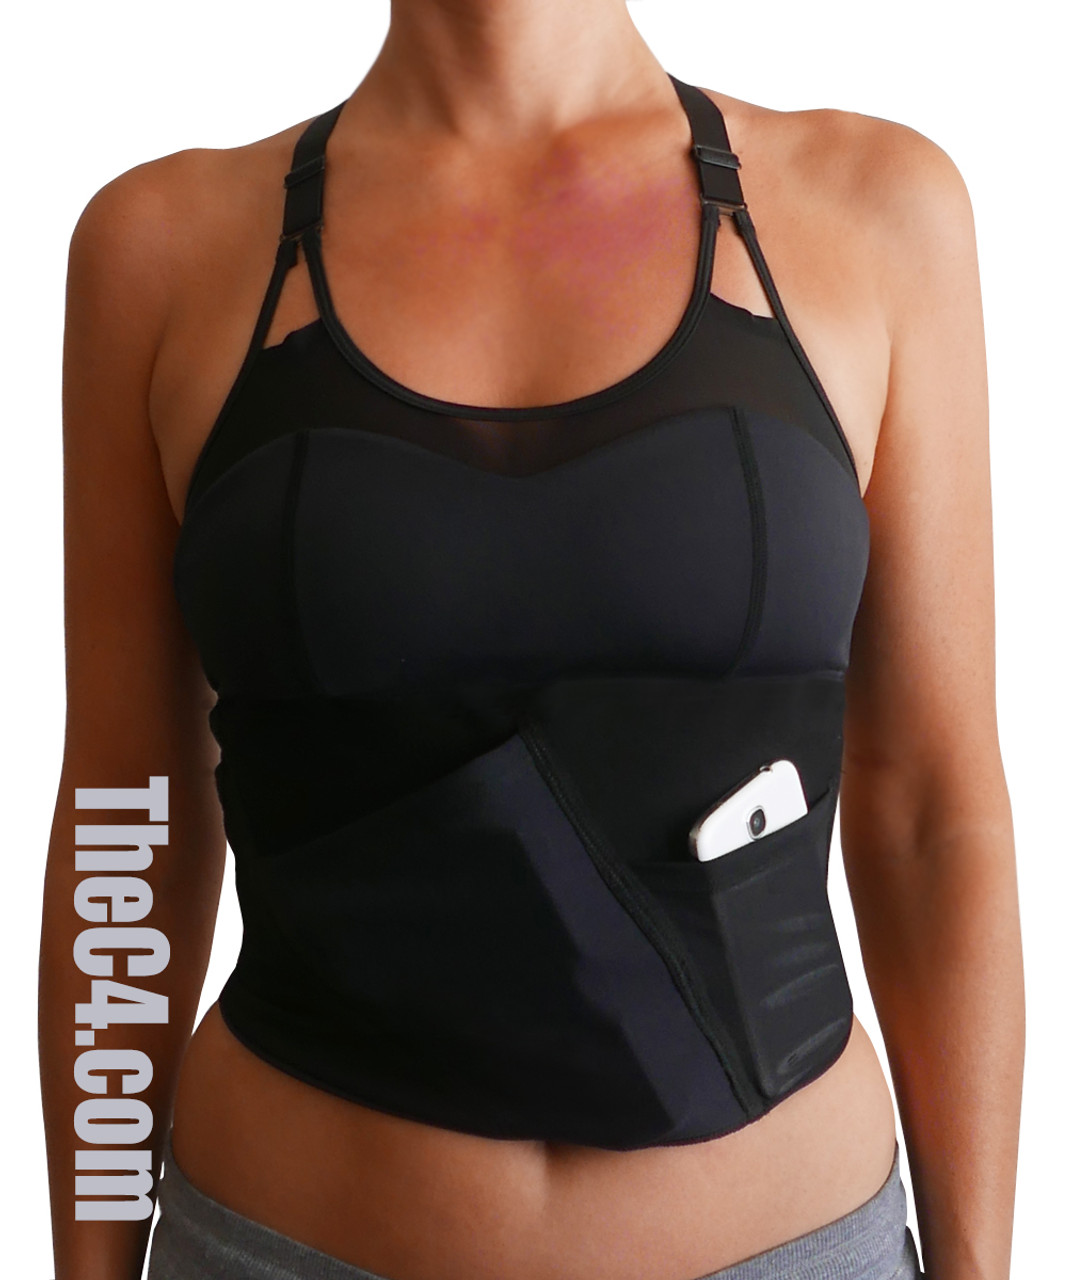 Platinum Active Bra Top Holster - Shop Women's Concealed Carry Holsters